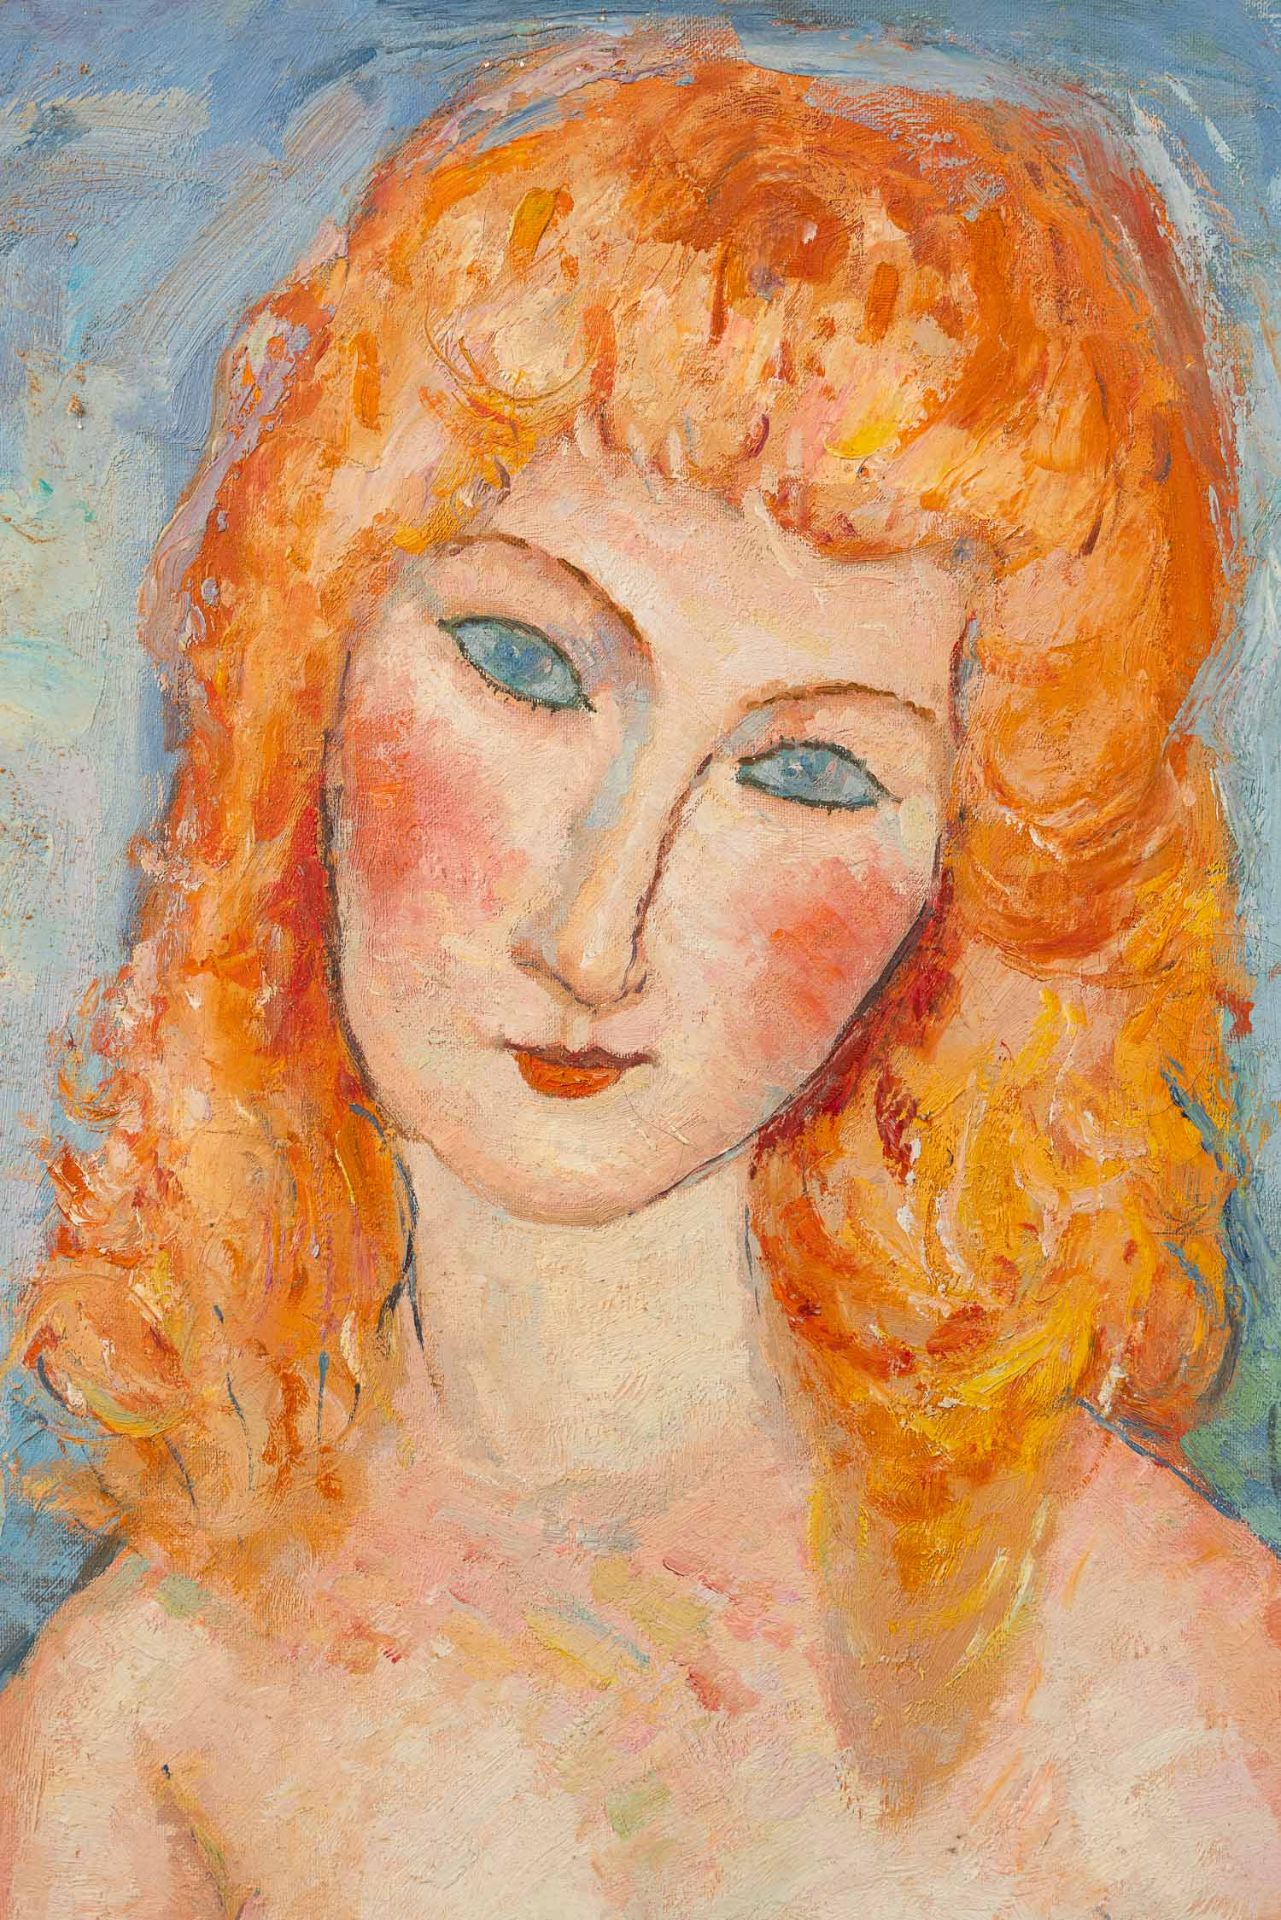 Amedeo Modigliani (1884-1920) – After - Image 3 of 3